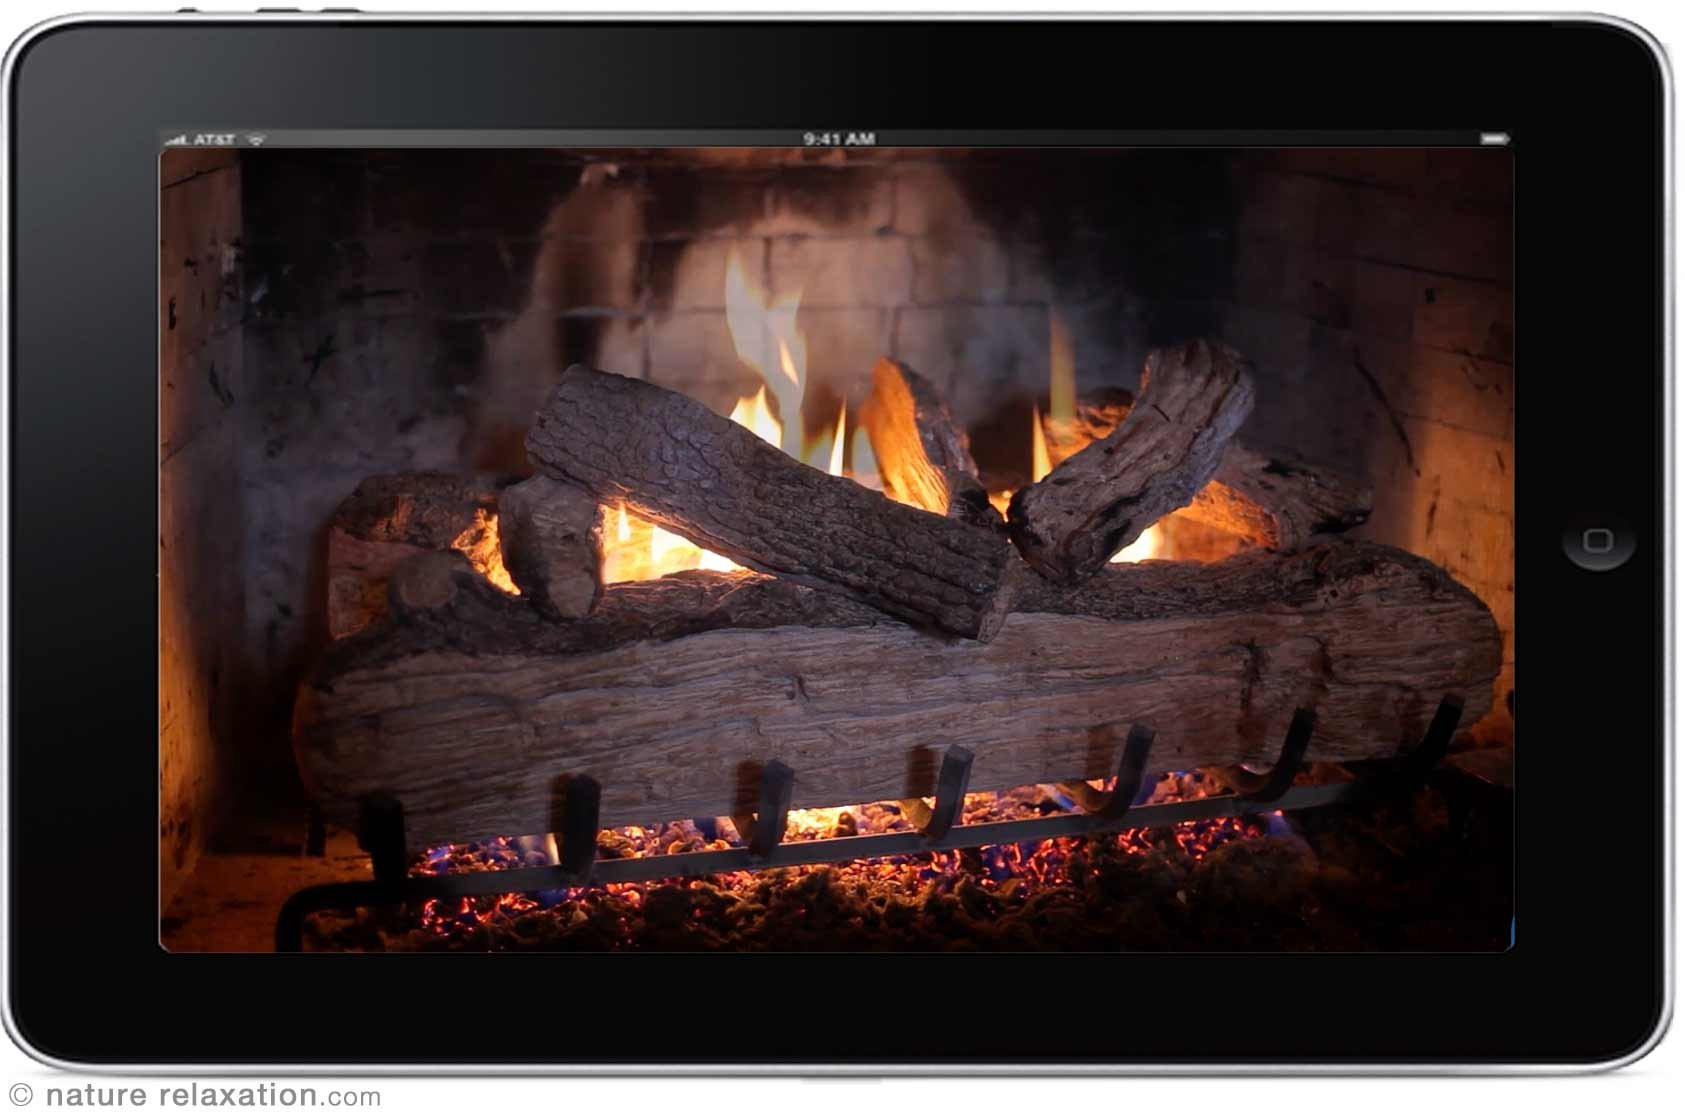 Christmas Music With Crackling Fireplace
 "Crackling Fireplace" Looping Nature Relaxation Video